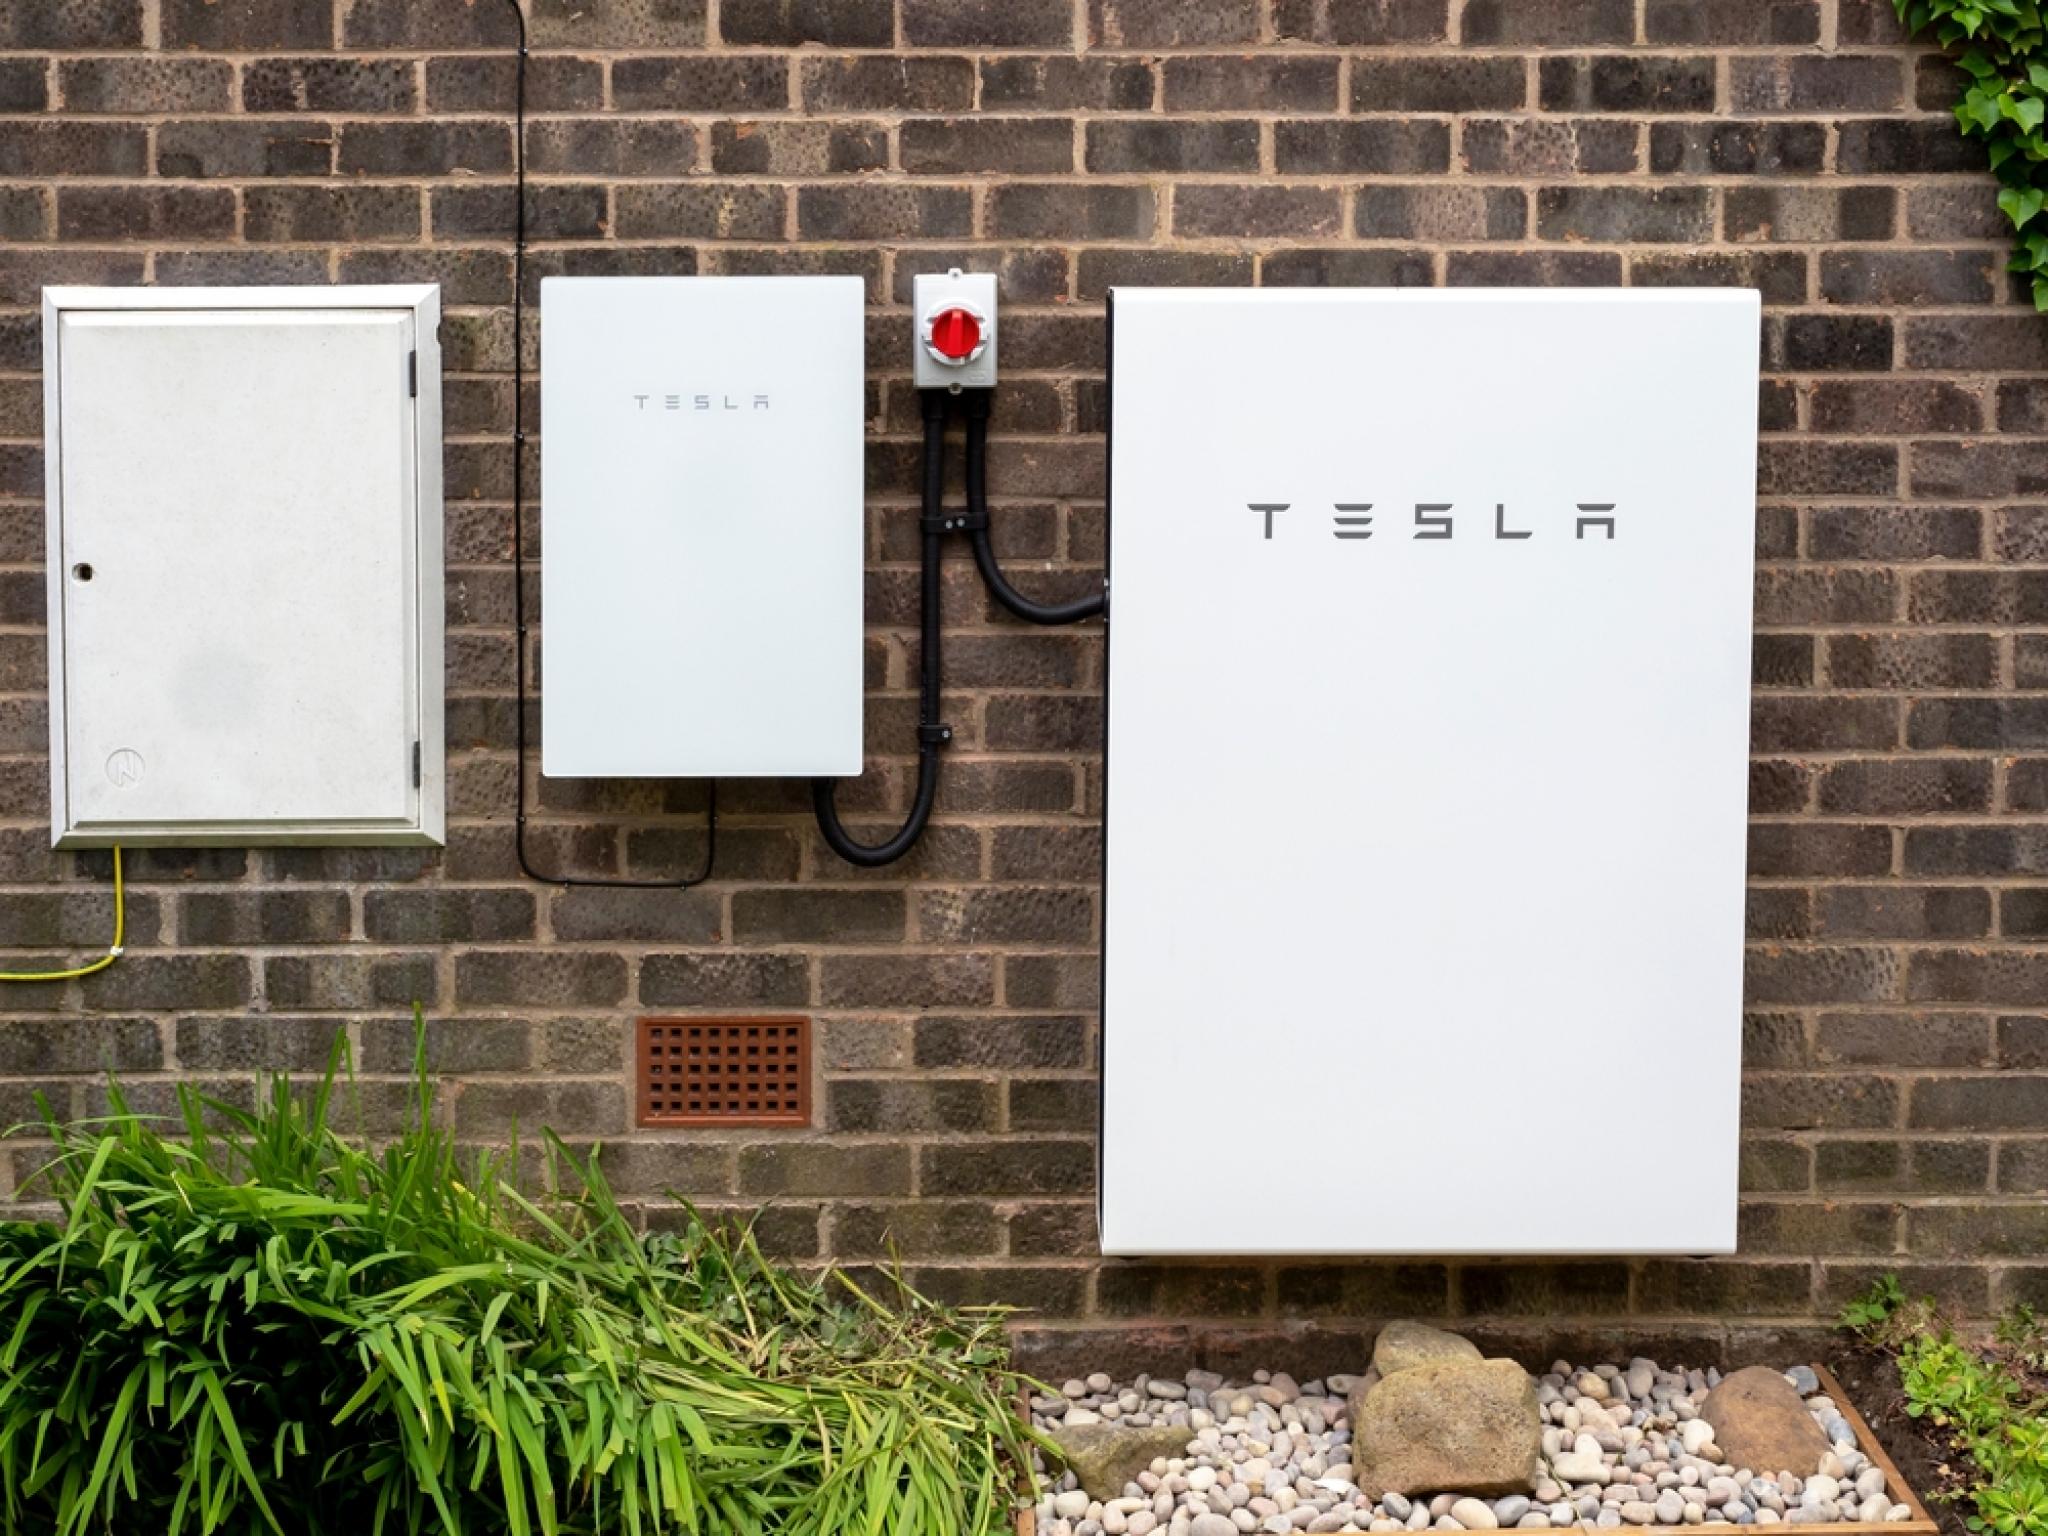  tesla-says-it-can-make-one-powerwall-3-every-25-seconds-ceo-elon-musk-terms-it-a-great-product 